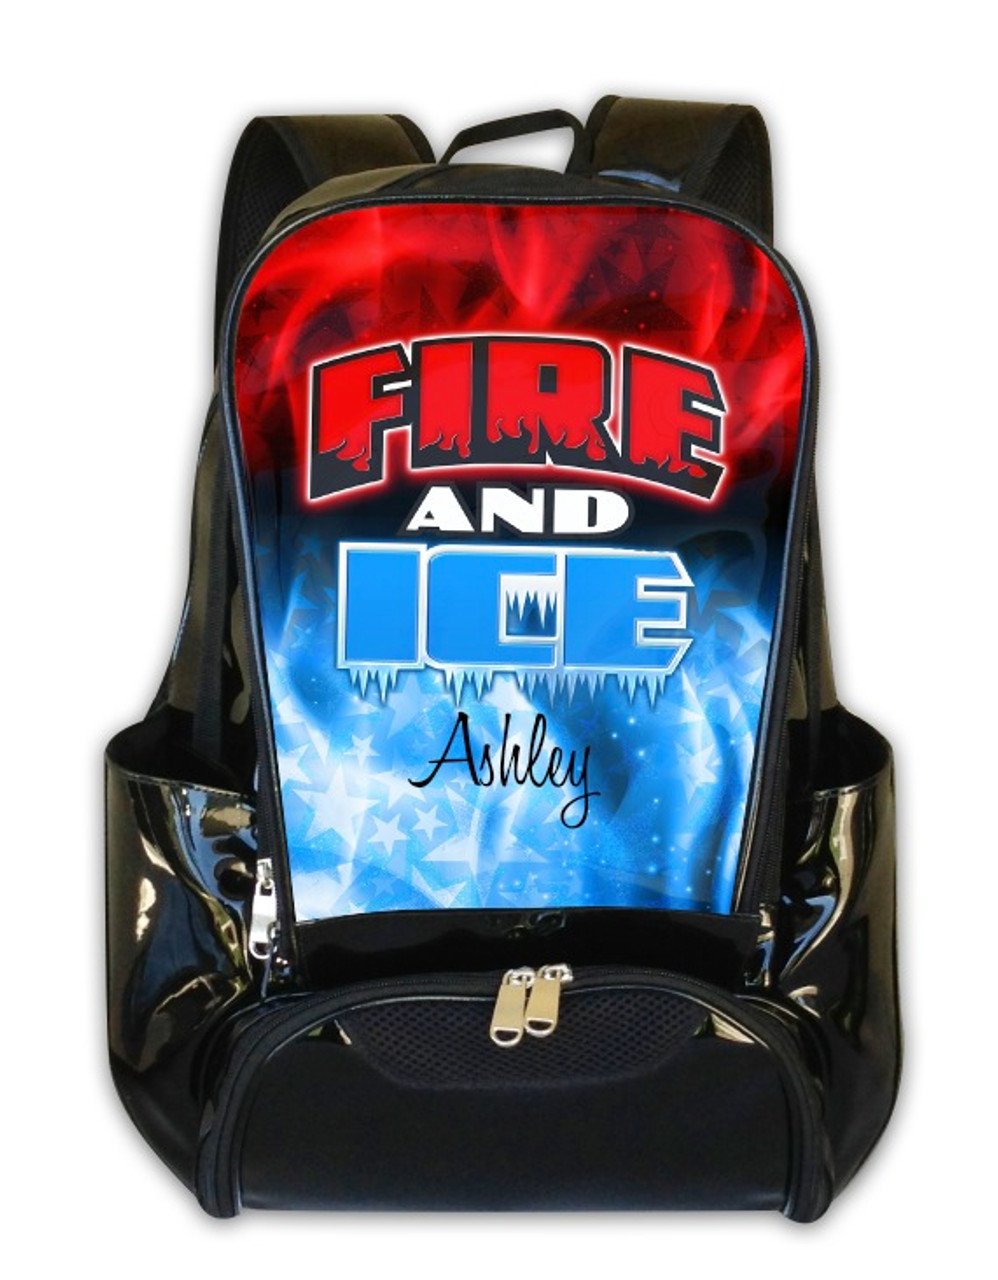 Customized and Personalized Fire and Ice Allstars Backpack